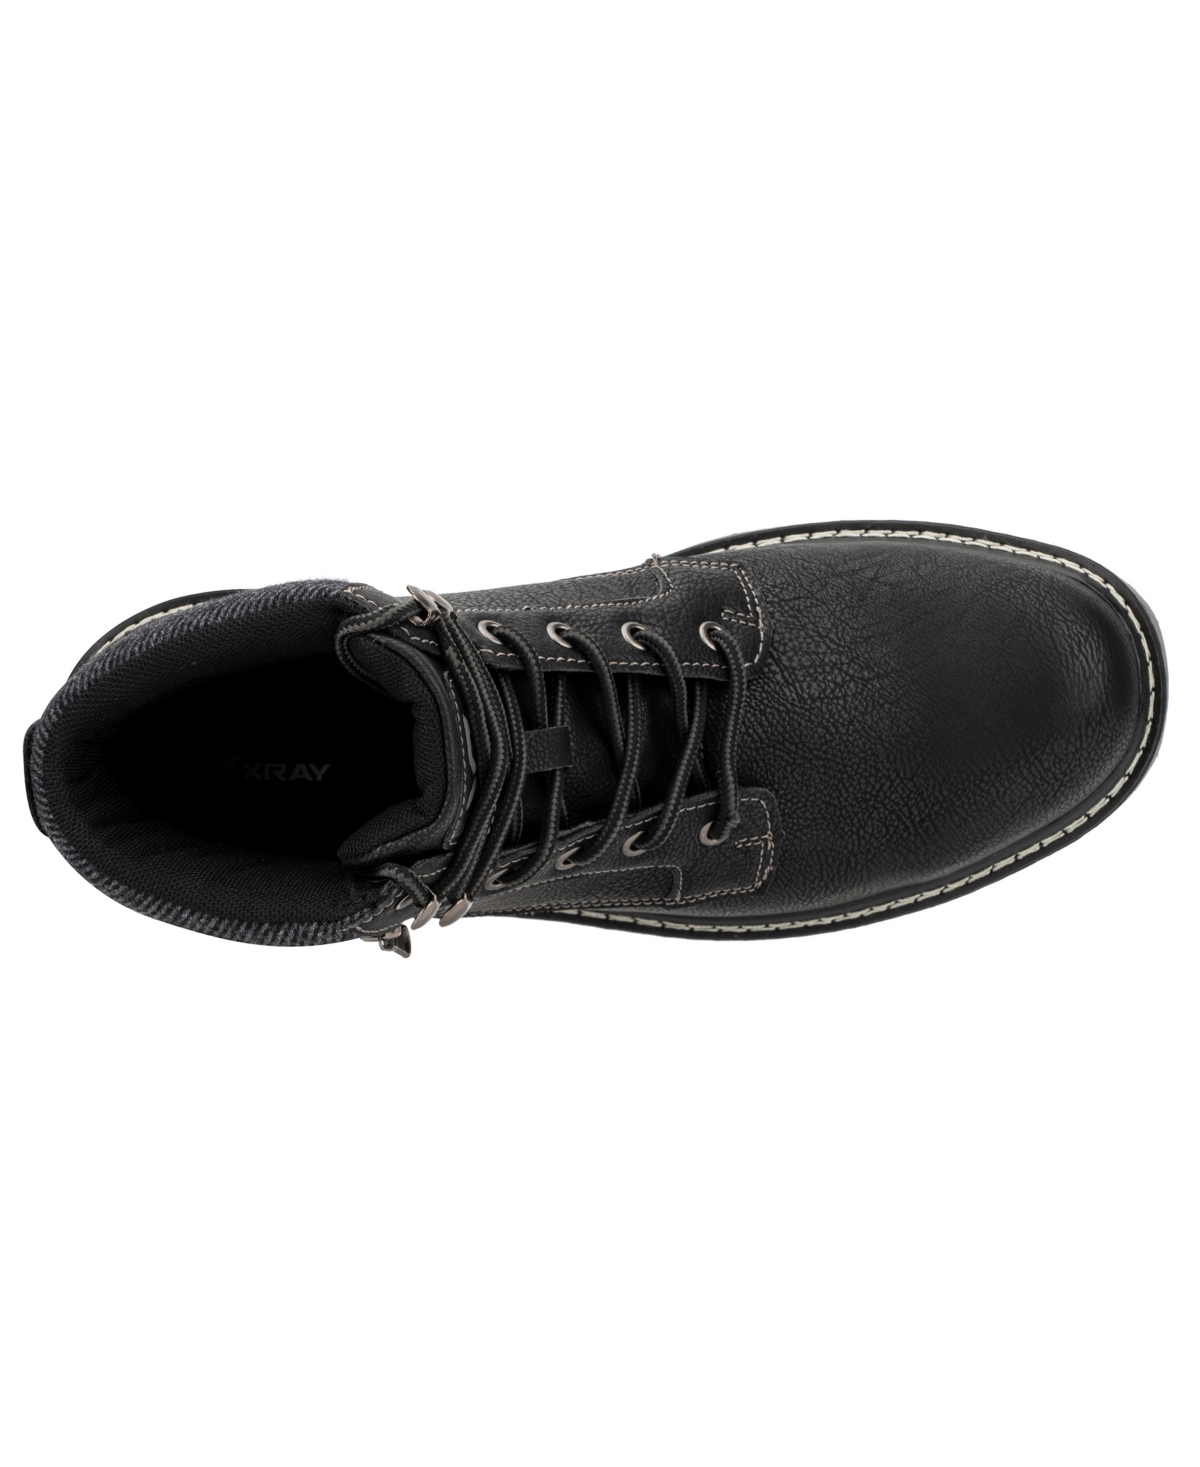 Shop X-ray Men's Alistair Lace-up Boots In Black